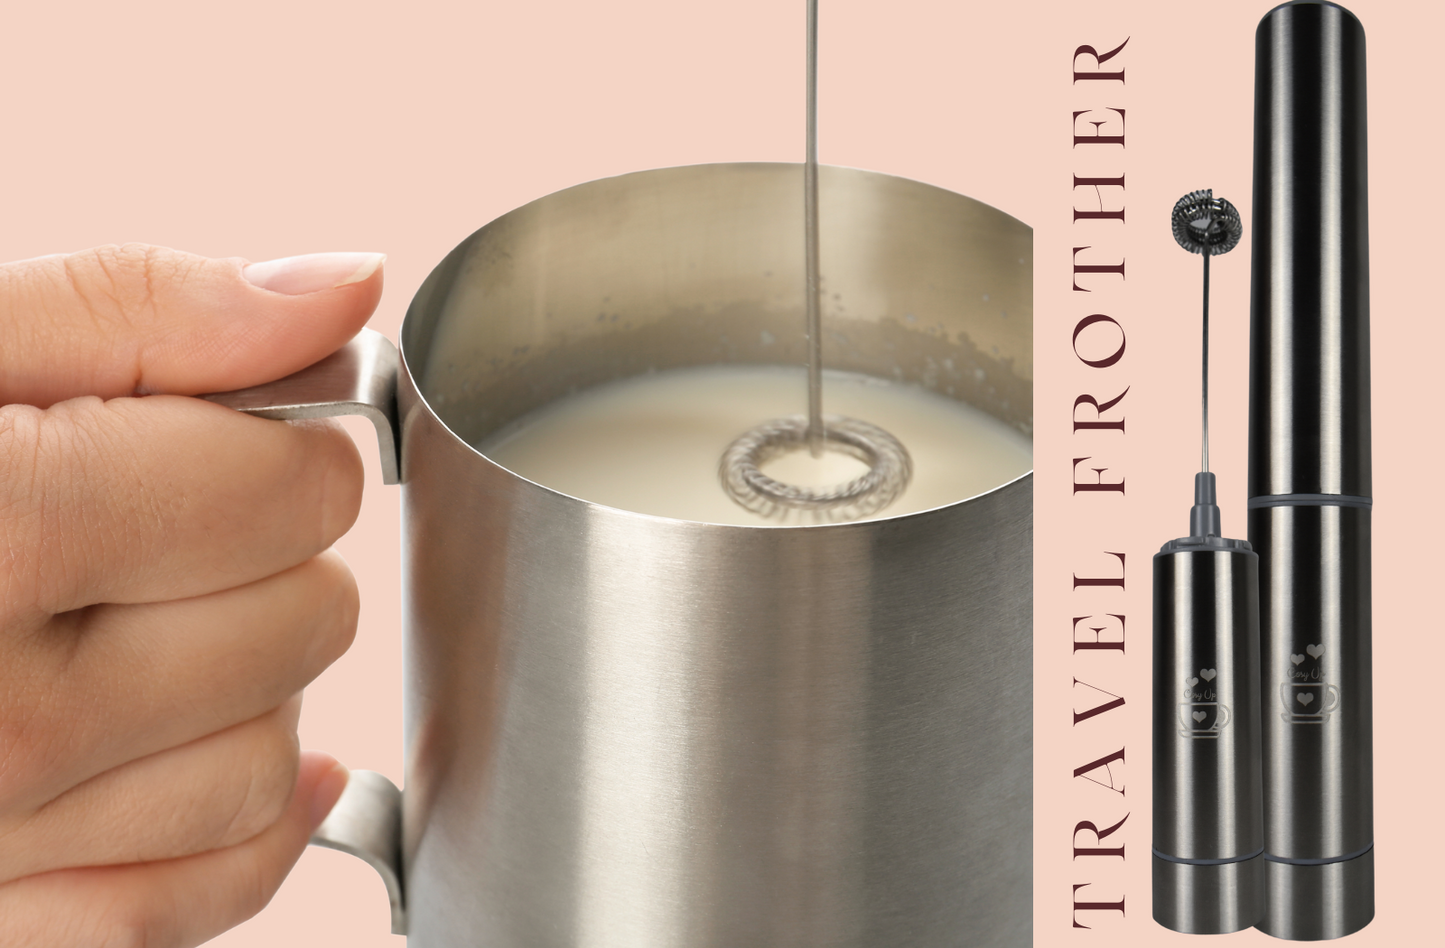 Milk Frother Handheld, Battery Operated - Travel Coffee Frother or Milk Foamer